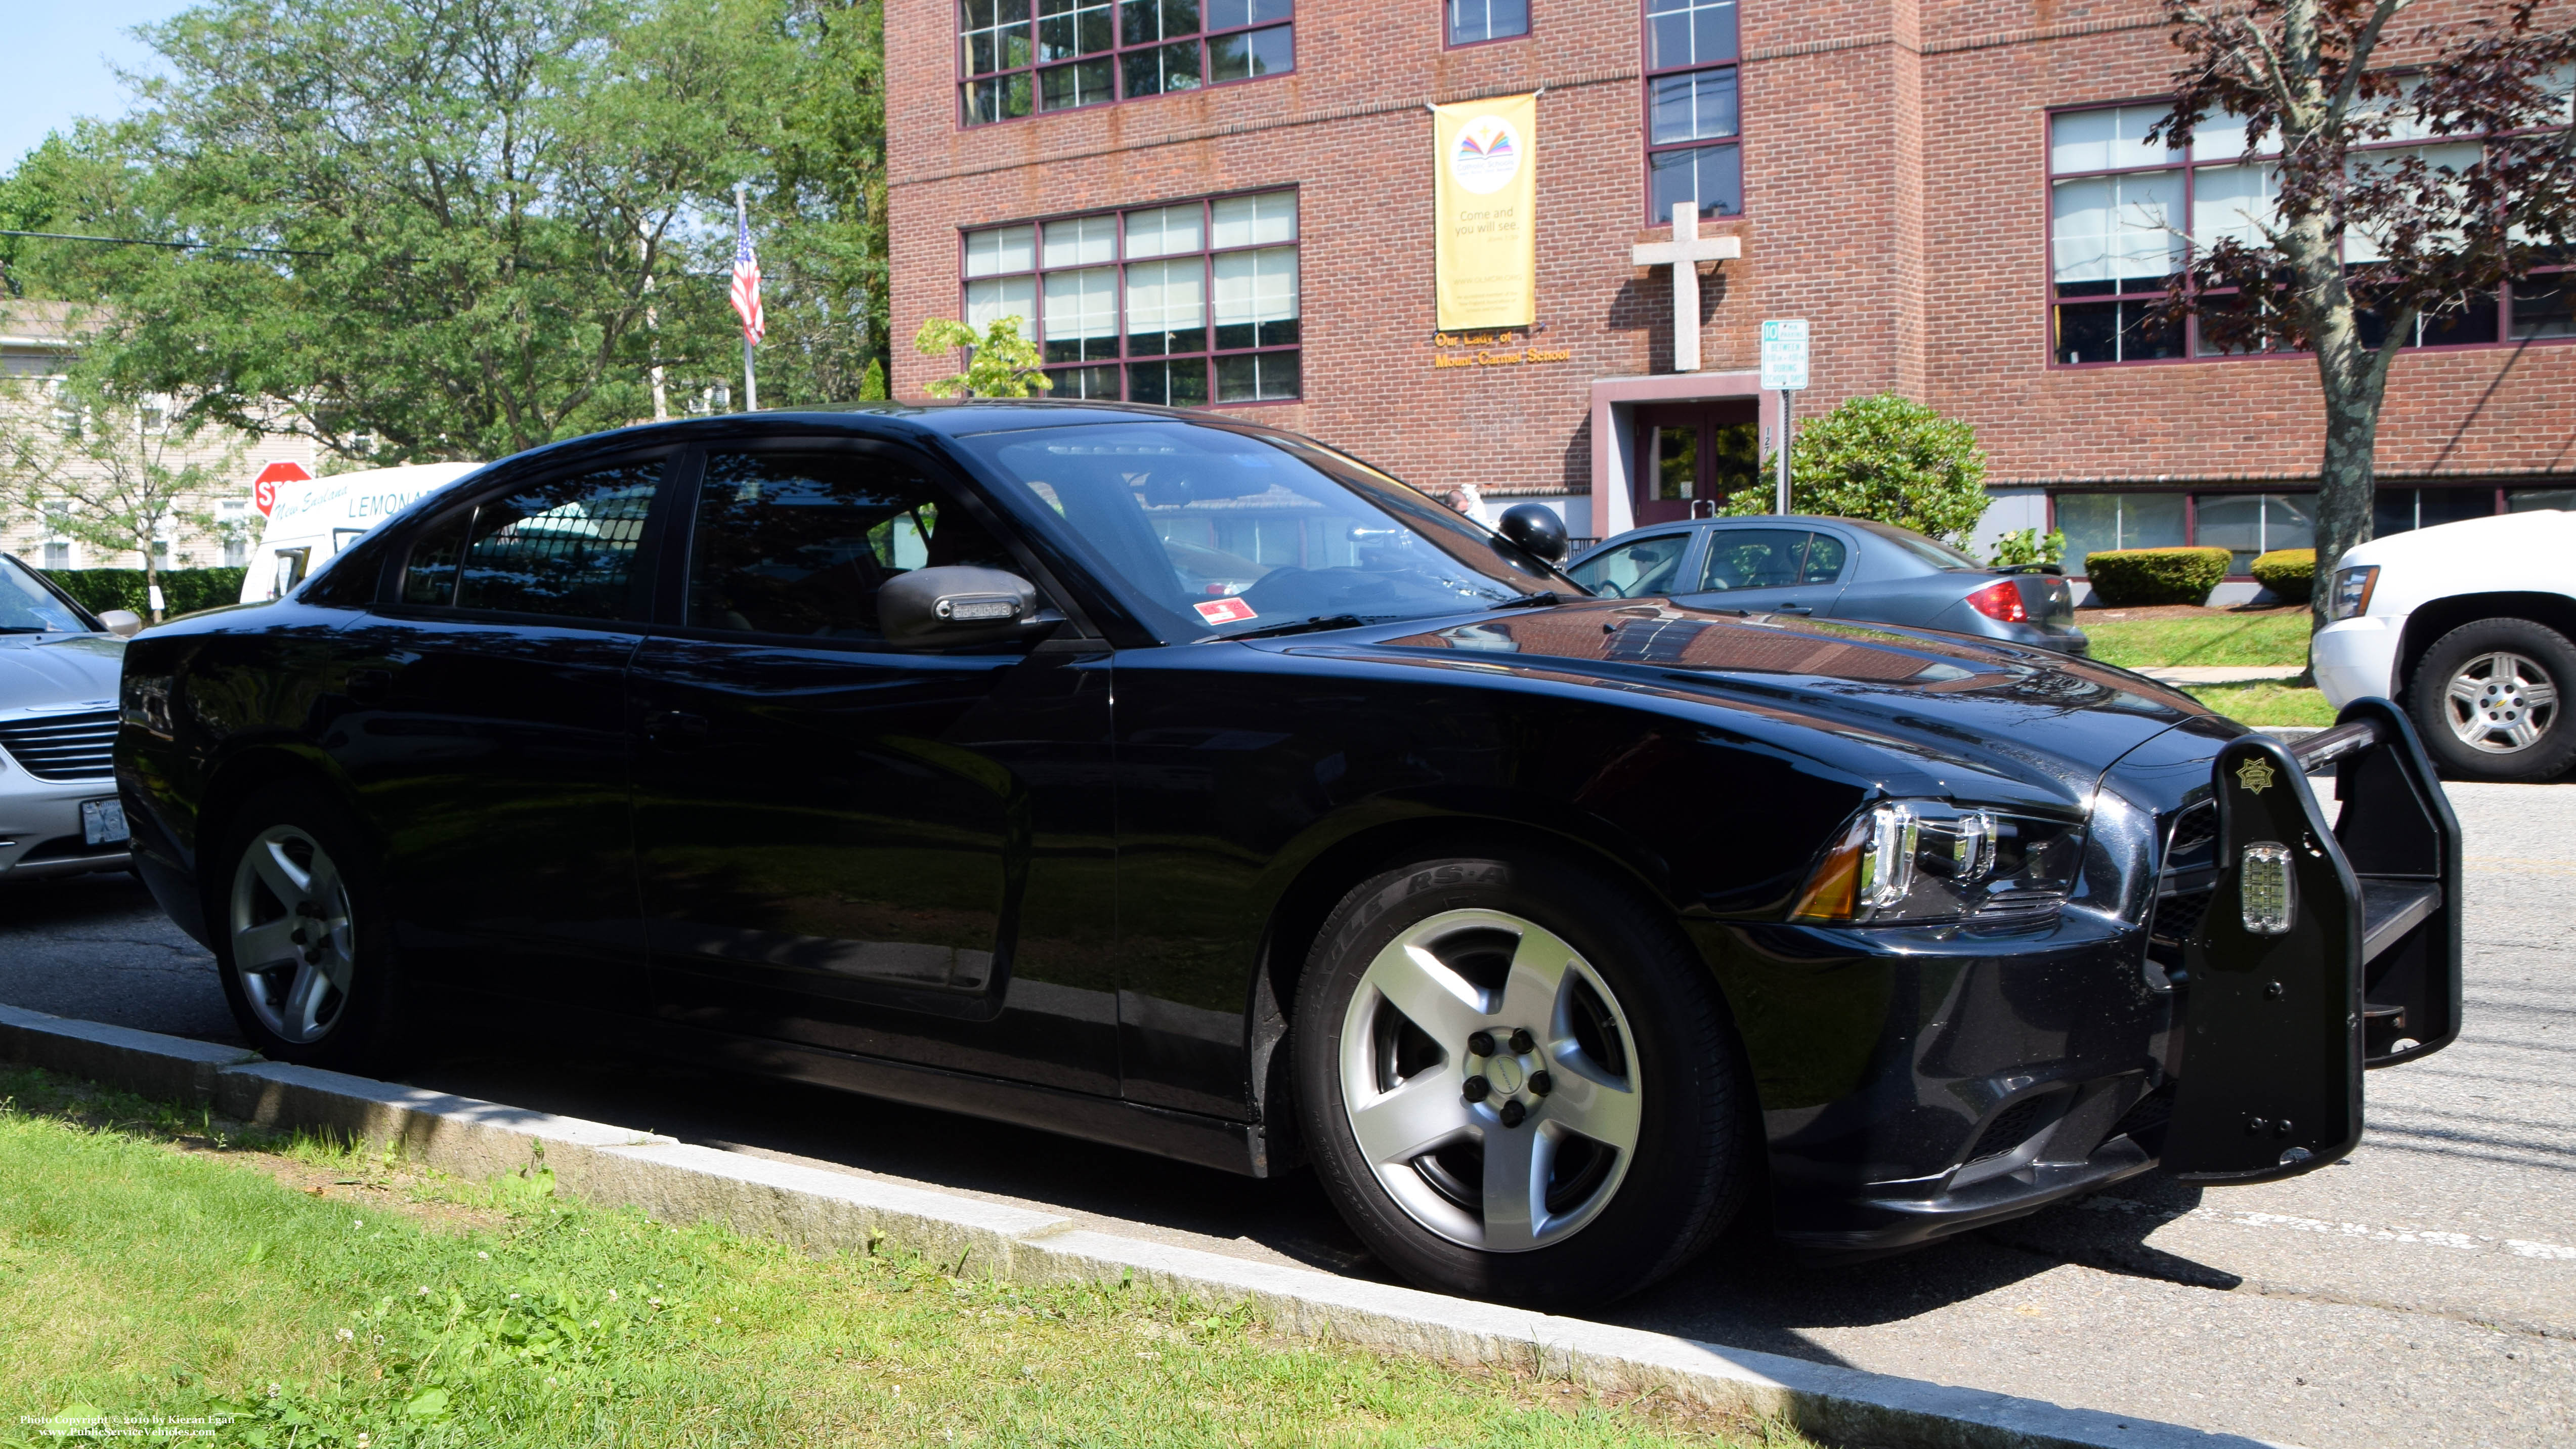 A photo  of Rhode Island State Police
            Cruiser 46, a 2013 Dodge Charger             taken by Kieran Egan